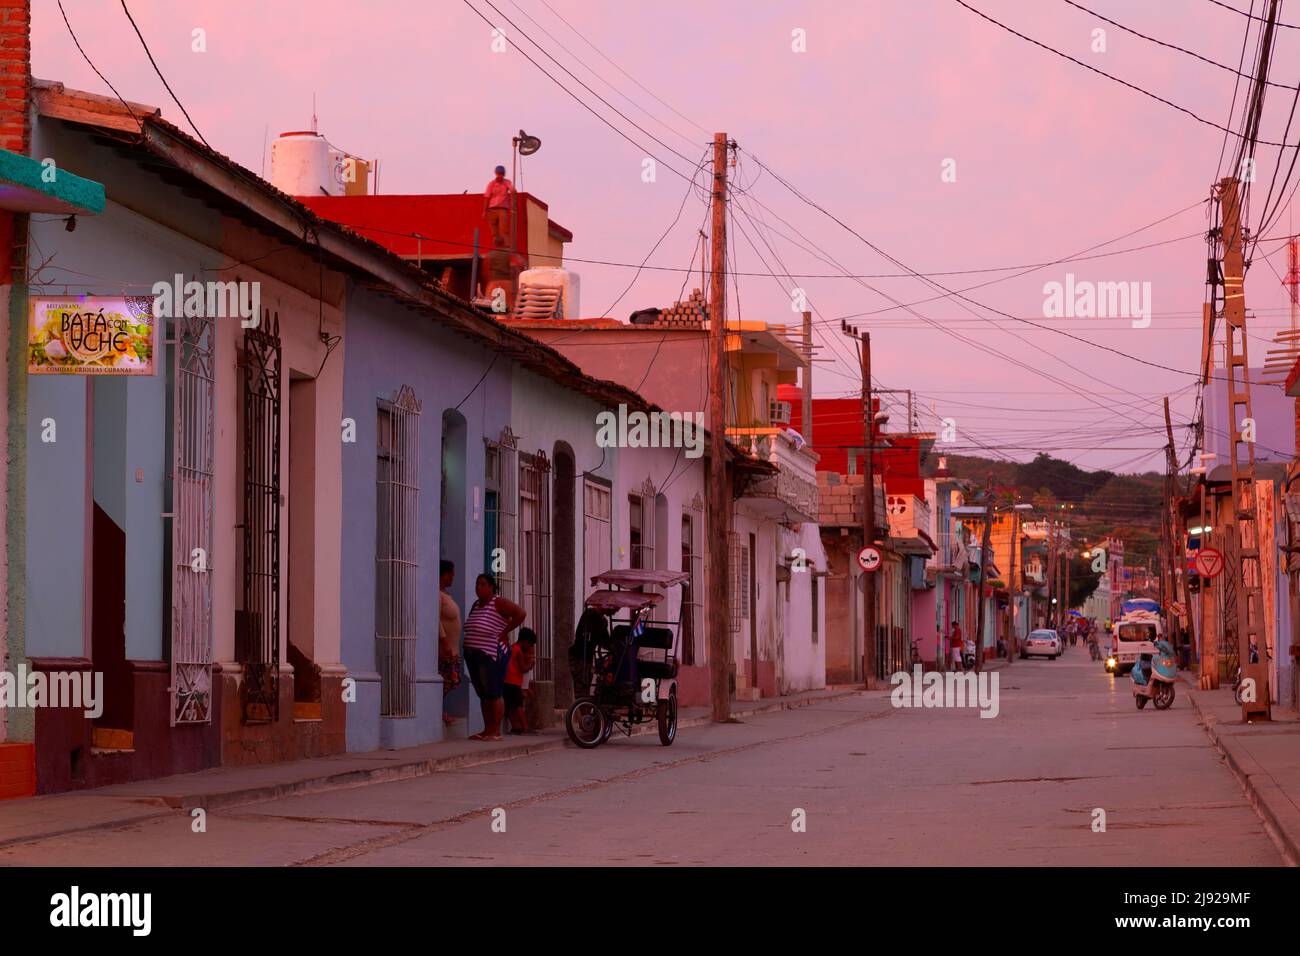 Picturesque street scene after sunset, cobblestones, telegraph pole with power lines, people, Cubans standing in front of front door, car, motorbike Stock Photo